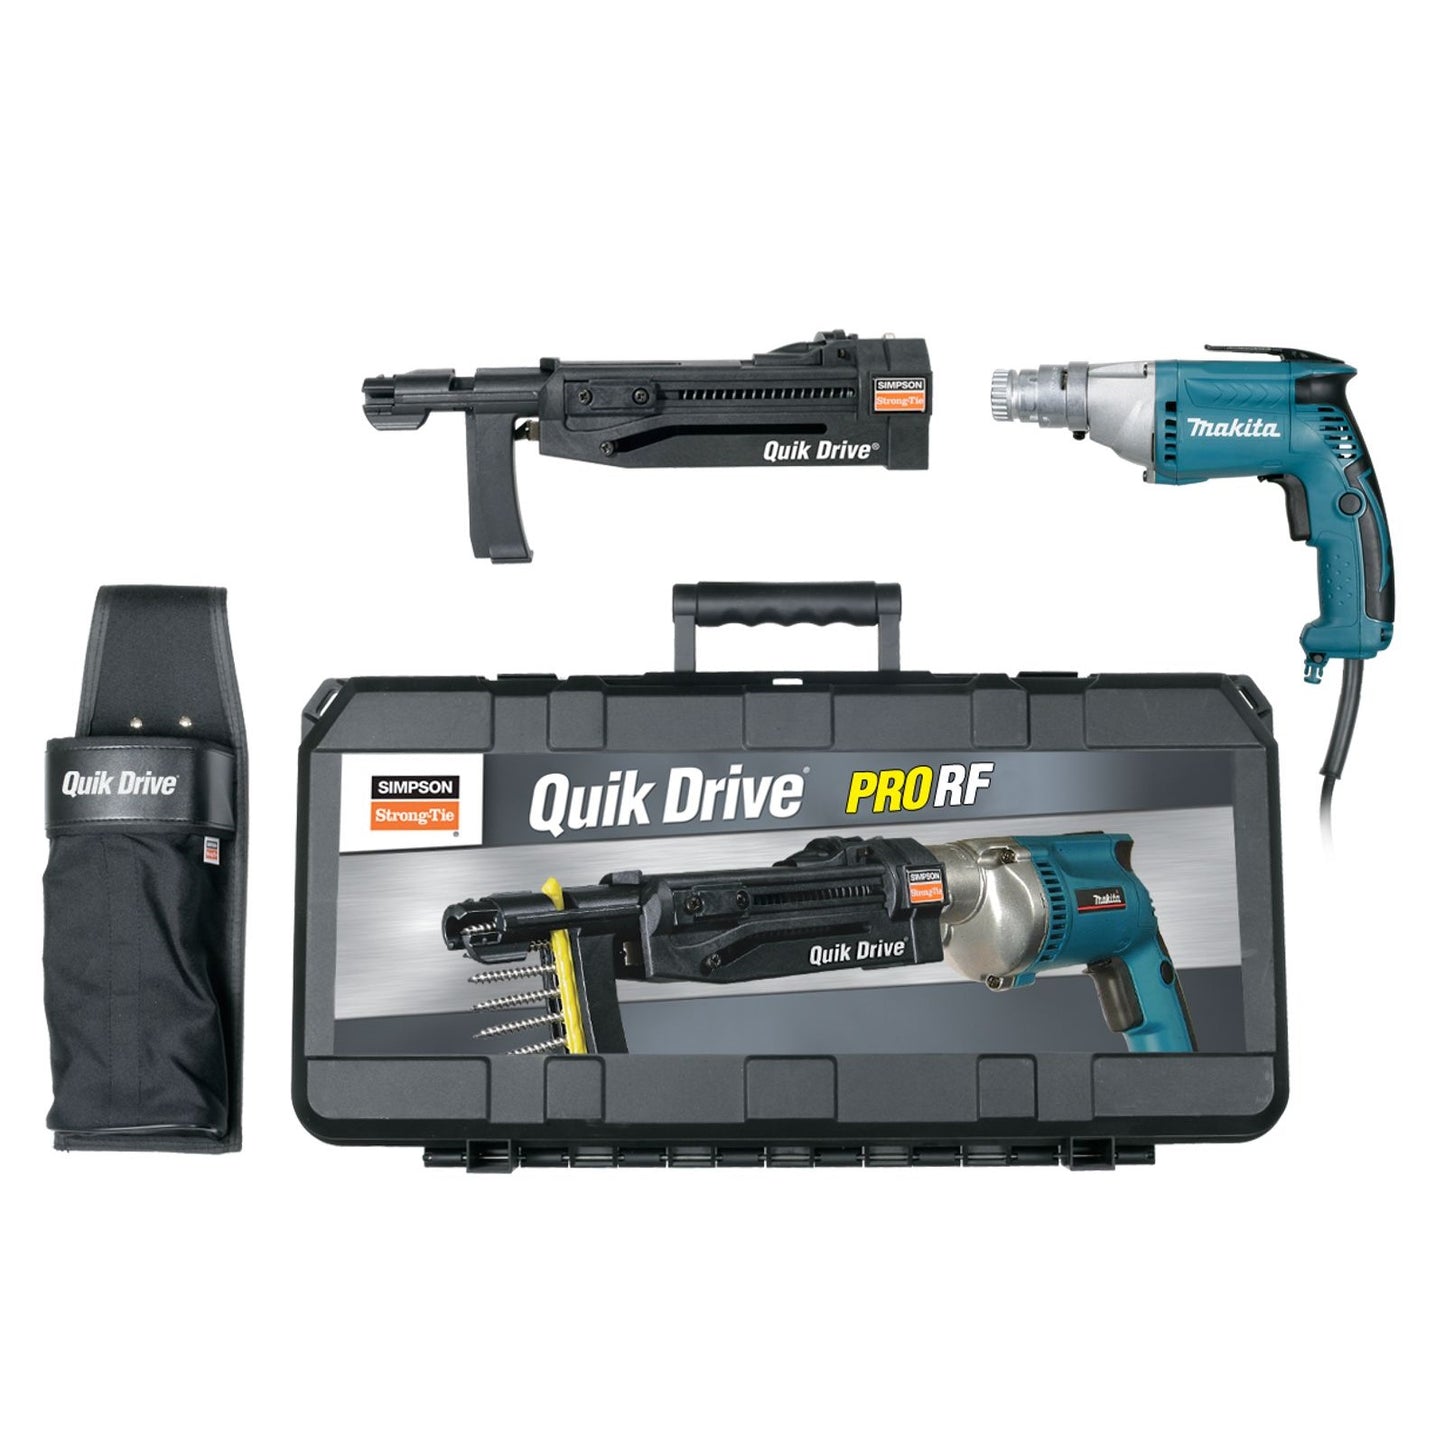 Simpson Quik Drive PRORFG2M35K Roofing Tile System Makita 3500 RPM Motor